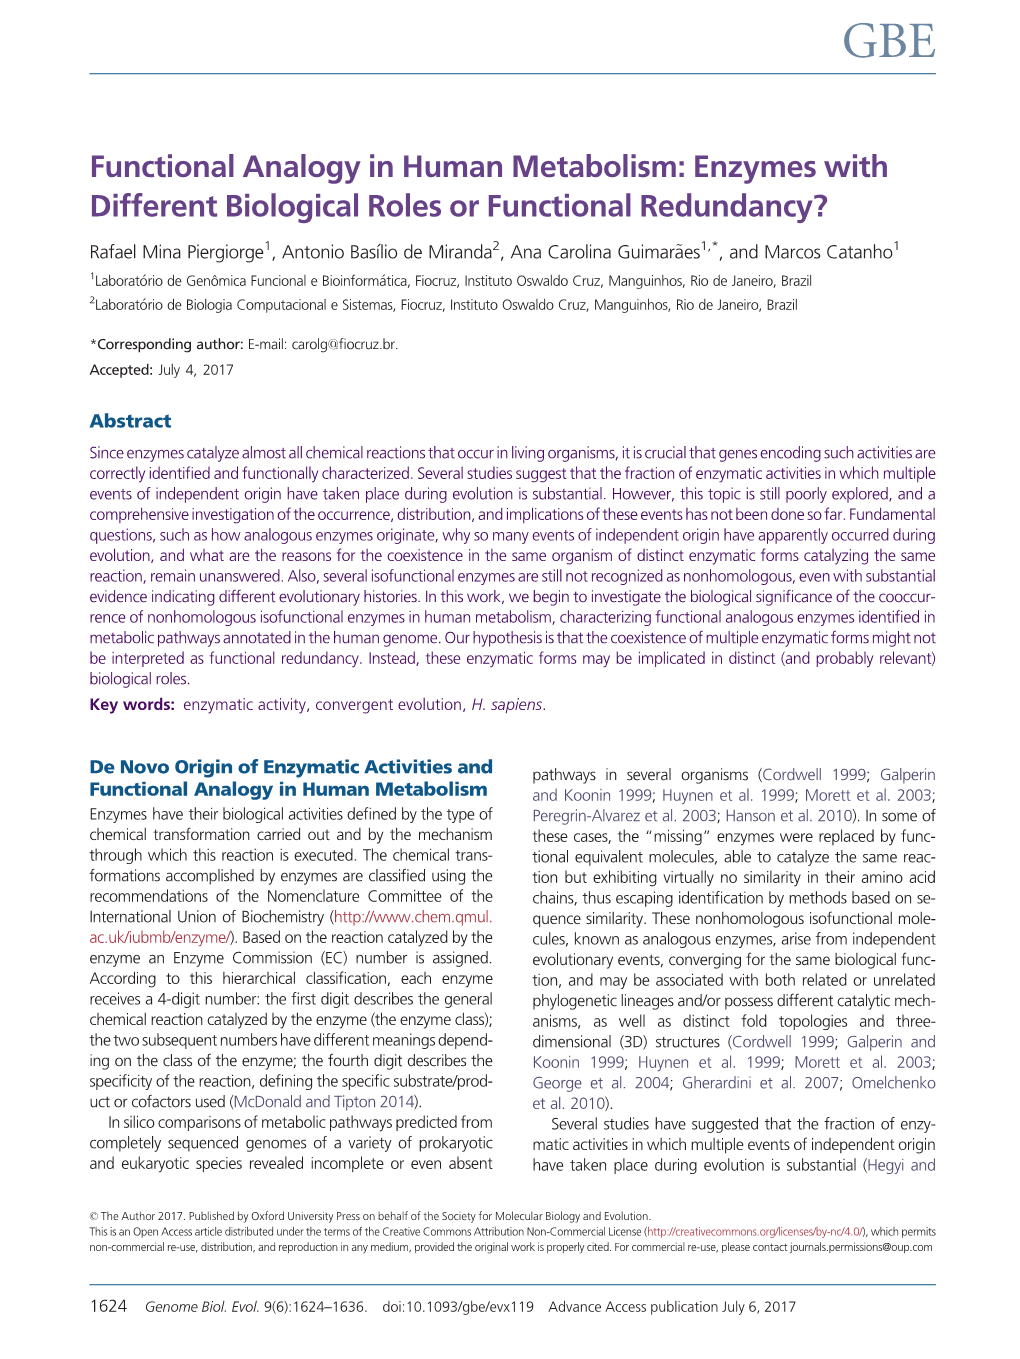 Functional Analogy in Human Metabolism: Enzymes with Different Biological Roles Or Functional Redundancy?